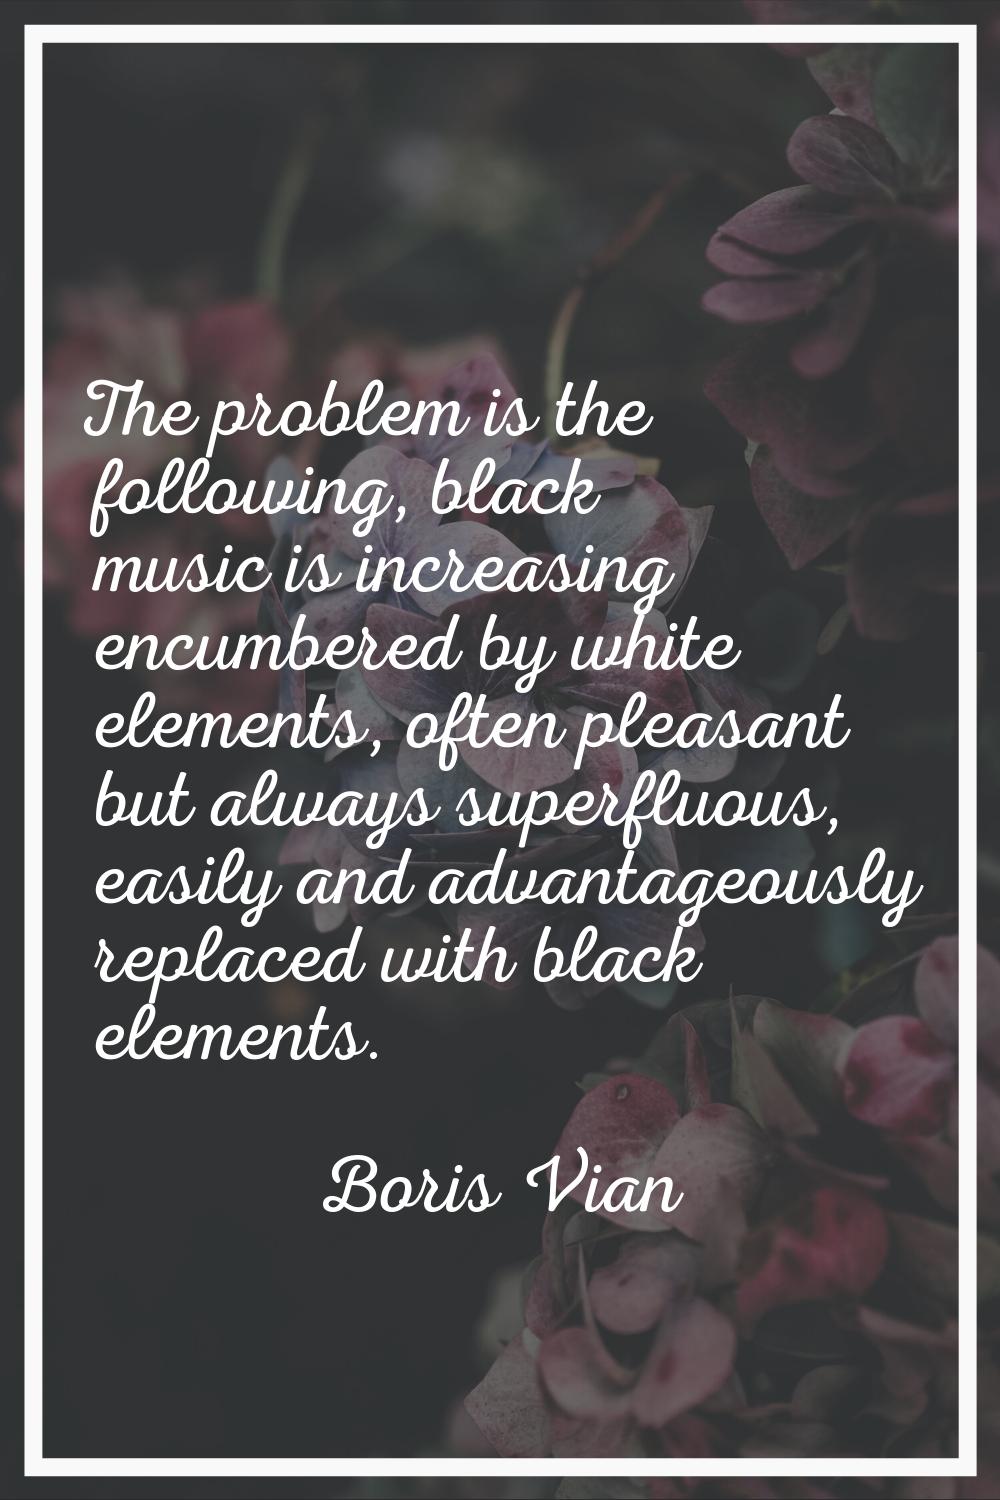 The problem is the following, black music is increasing encumbered by white elements, often pleasan